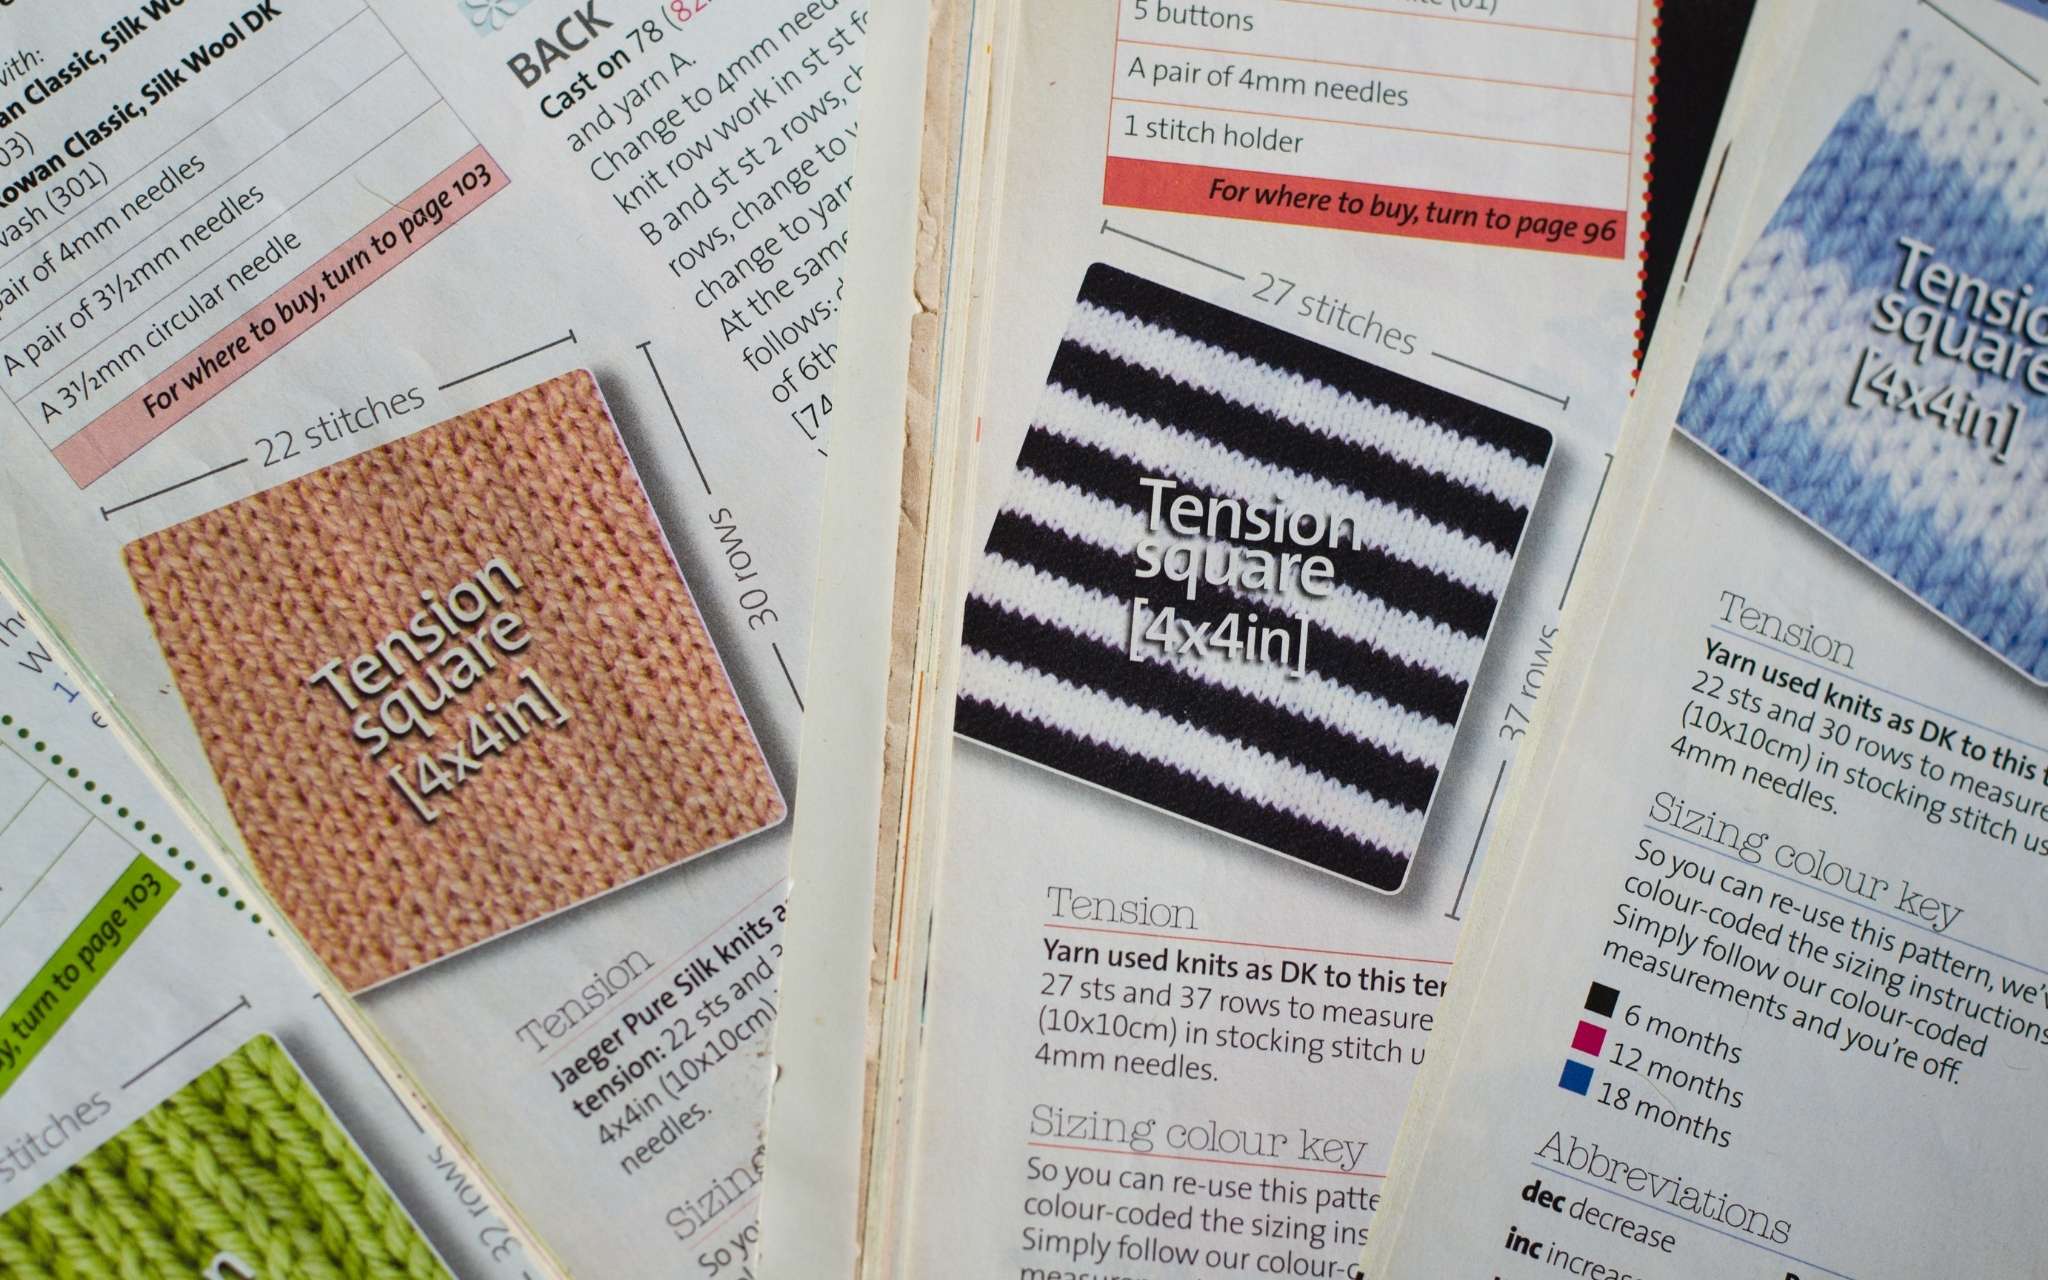 Pages from knitting magazines showing the gauge directions for different patterns.